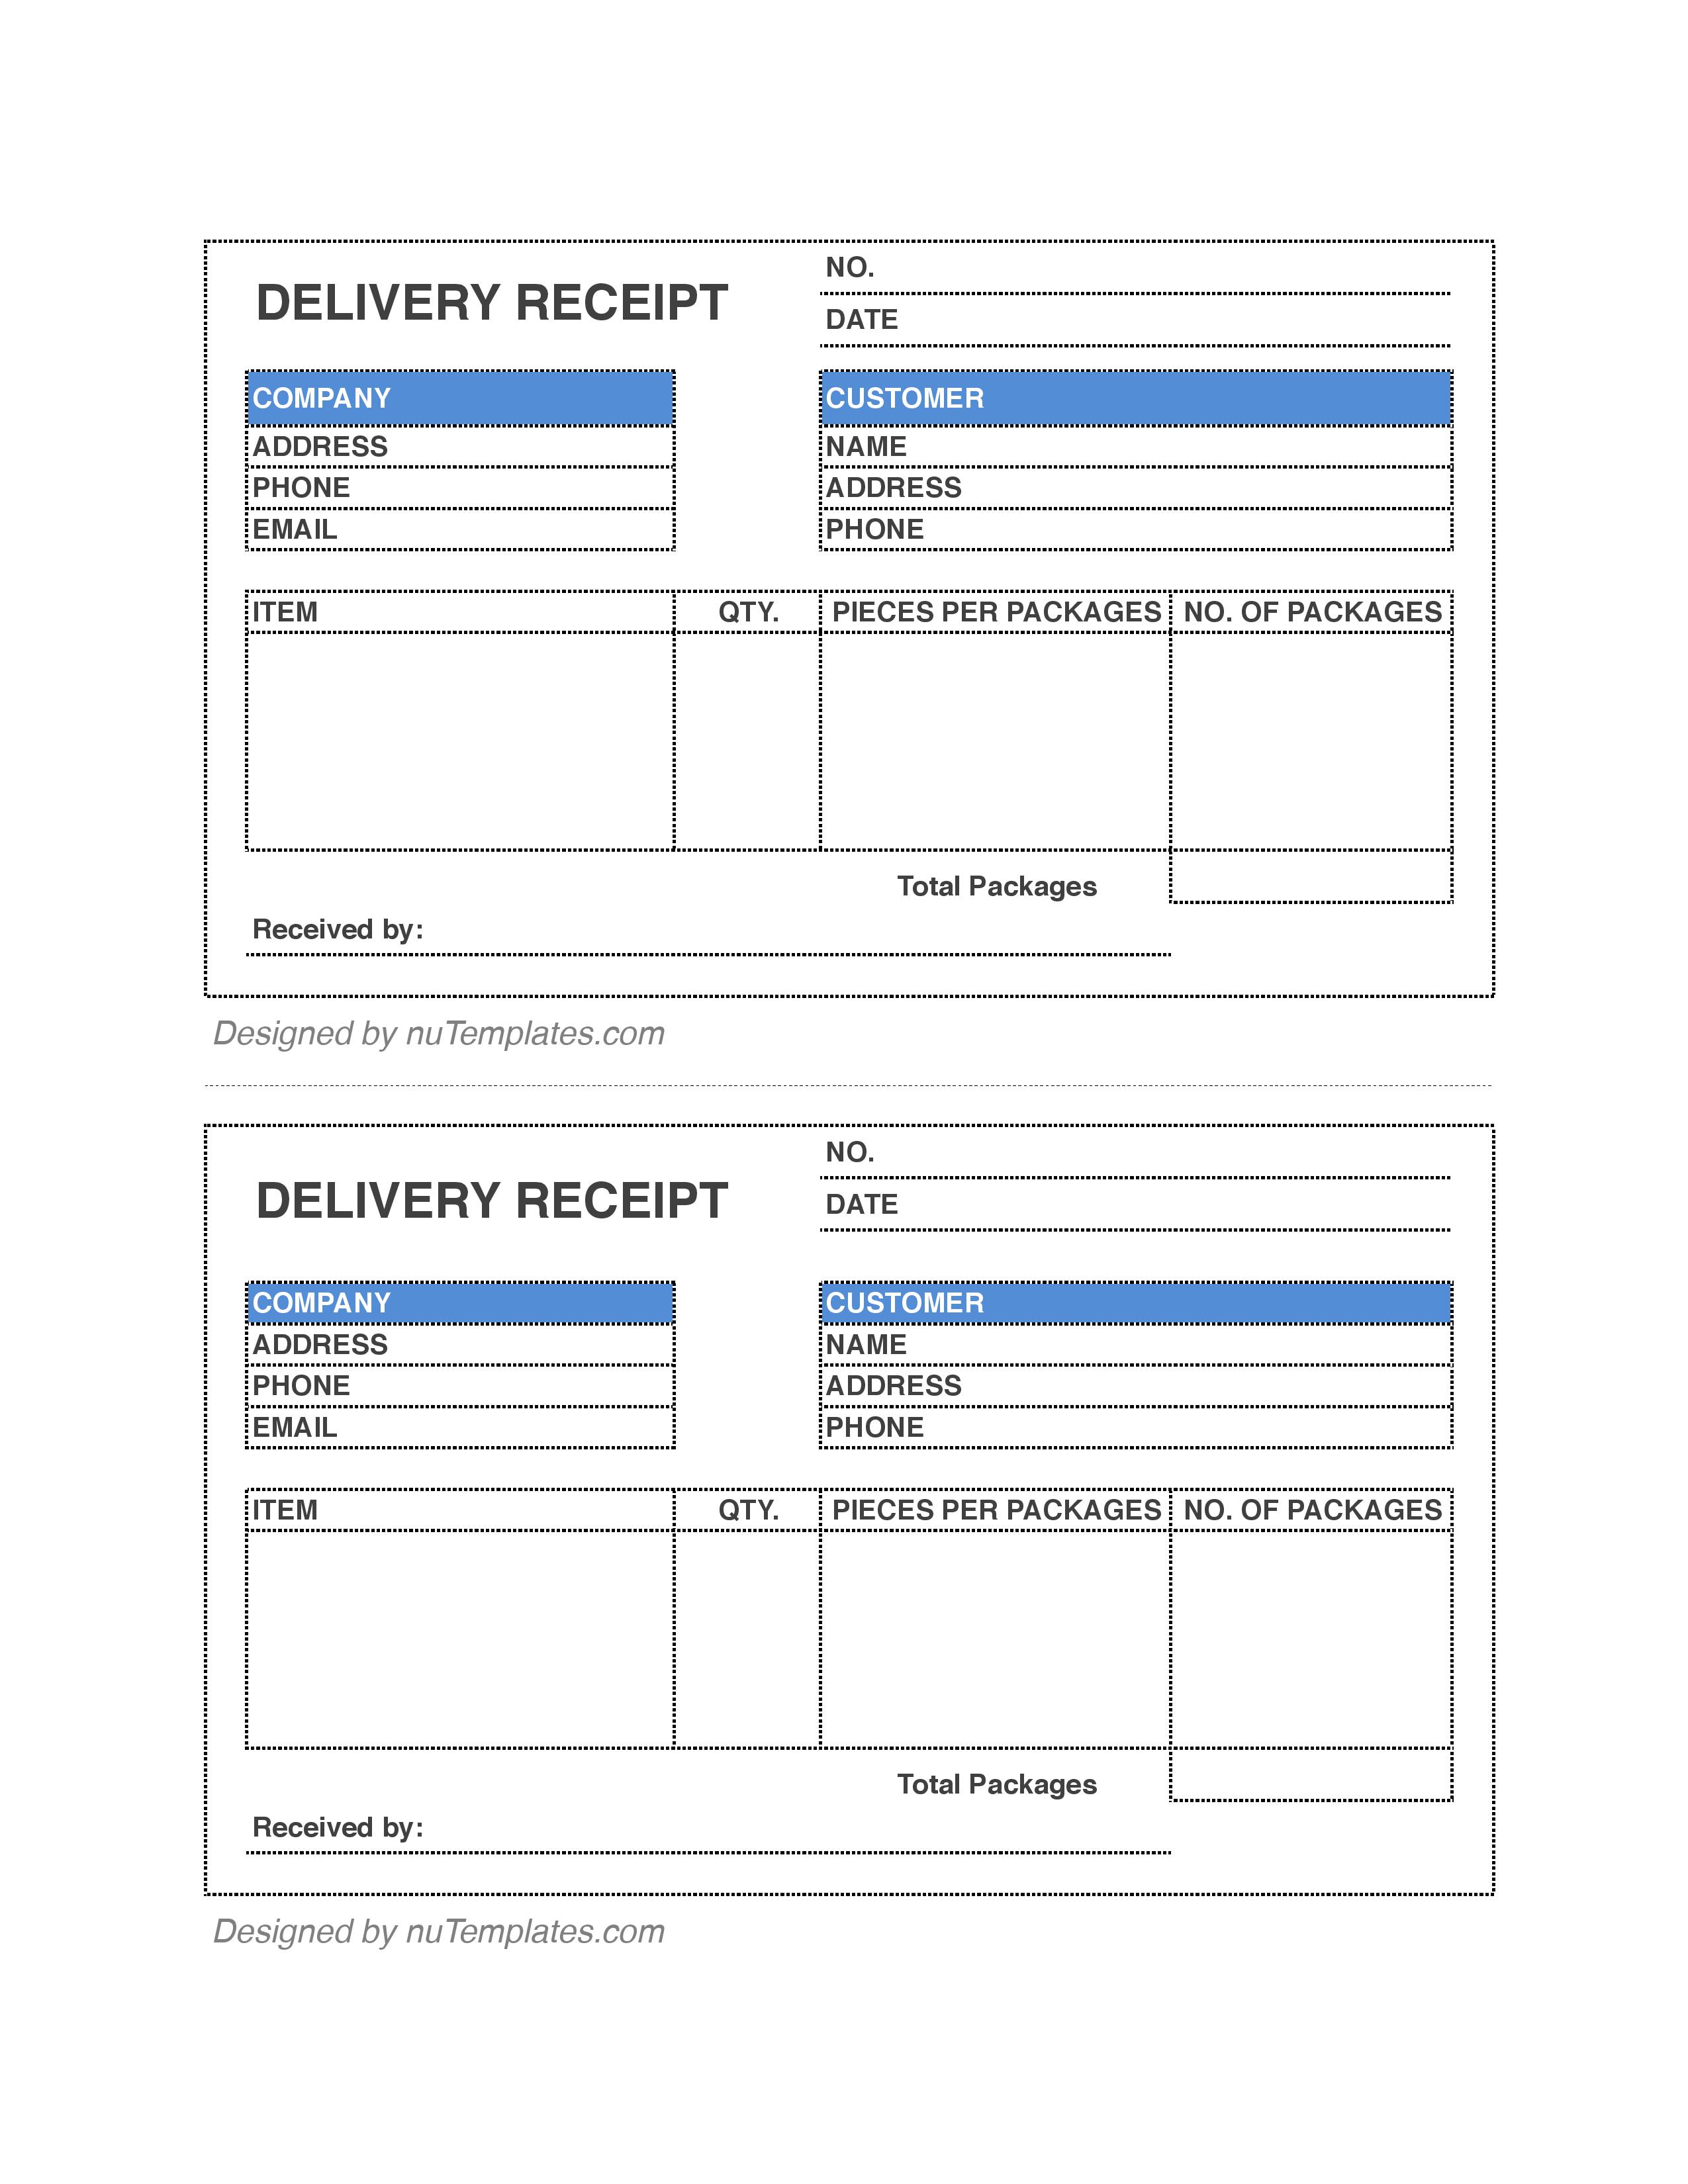 printable-delivery-receipt-template-word-free